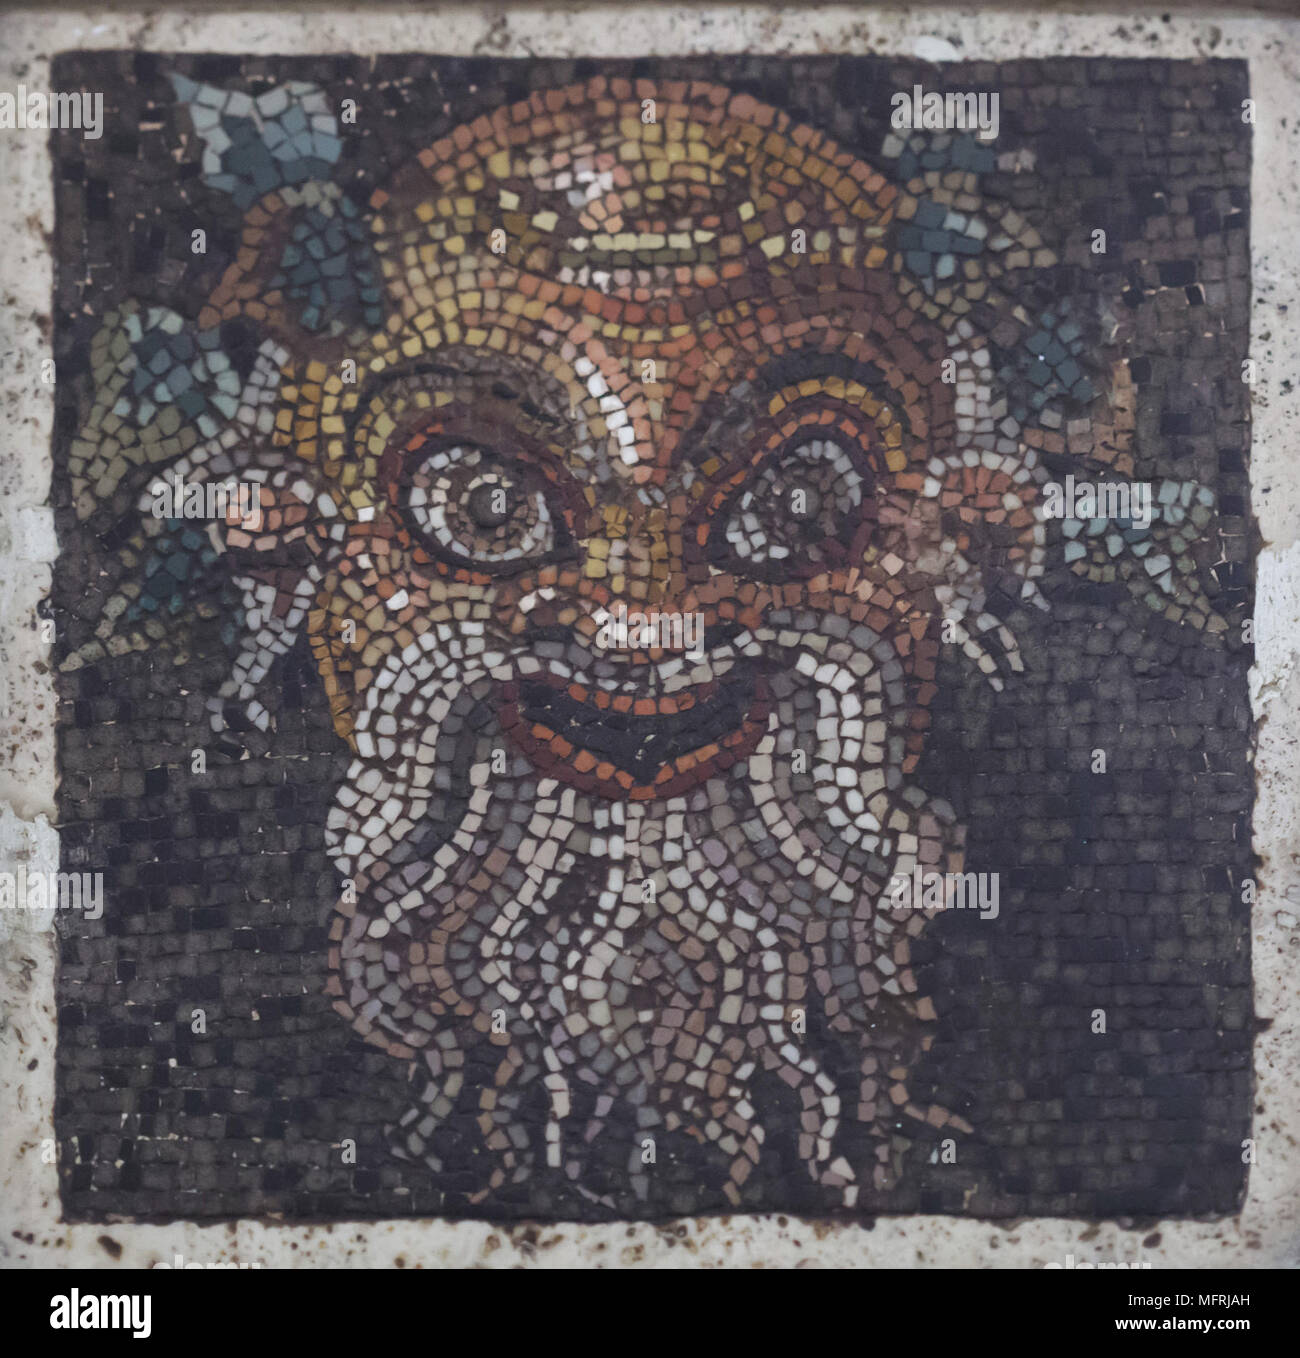 Theatrical mask depicted in the Roman mosaic from the Casa di Ganimede (House of Ganymede) in Pompeii, now on display in the National Archaeological Museum (Museo Archeologico Nazionale di Napoli) in Naples, Campania, Italy. Stock Photo